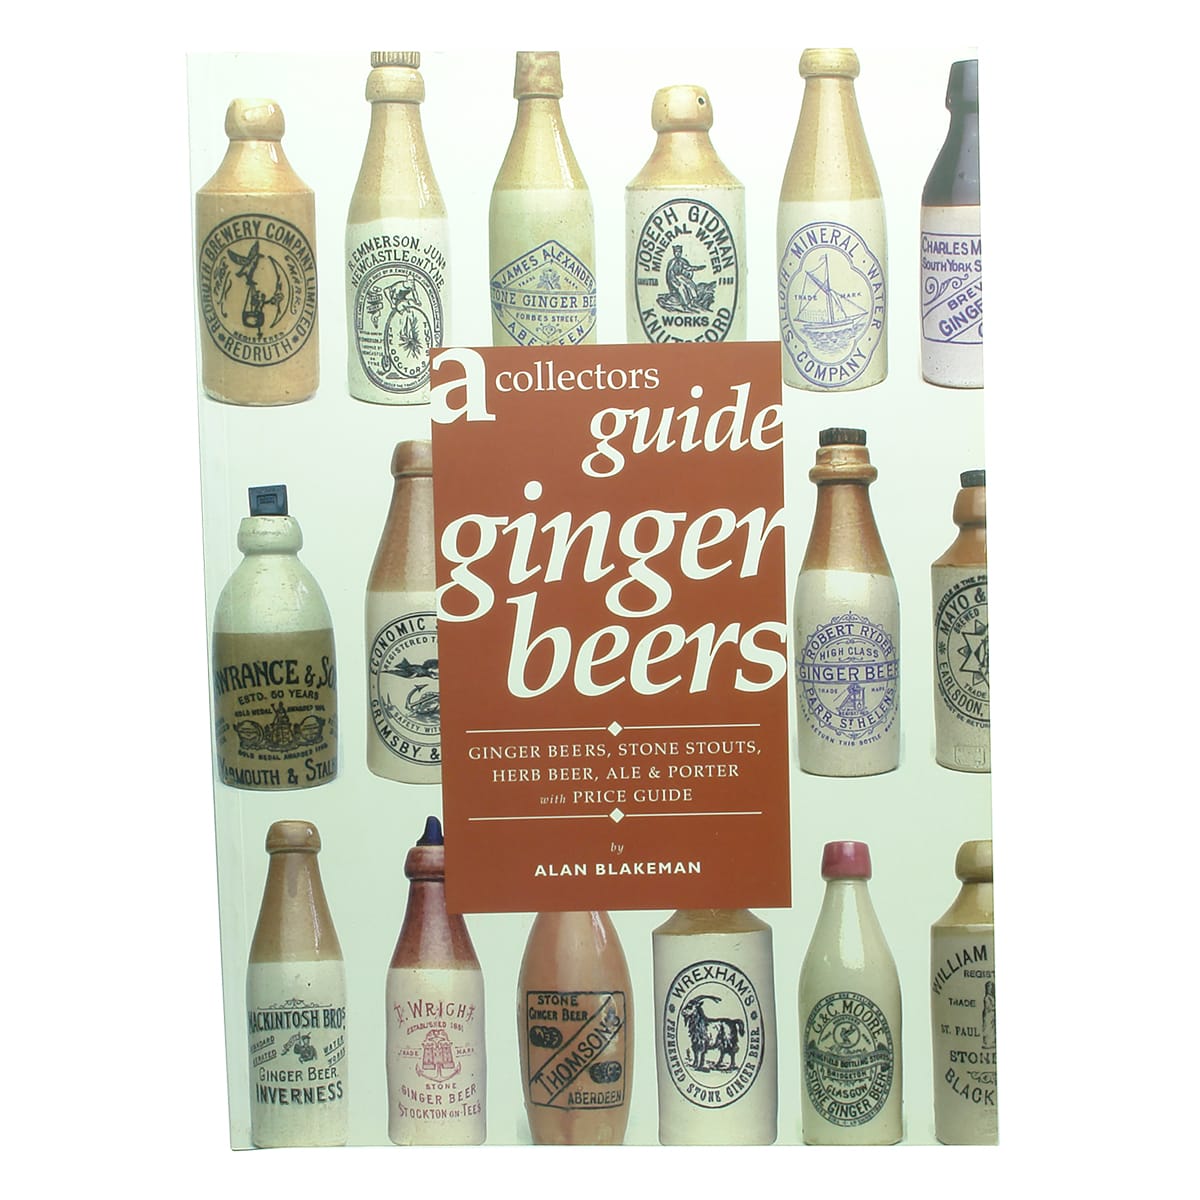 Book. A Collectors Guide Ginger Beers, Alan Blakeman, 1998.